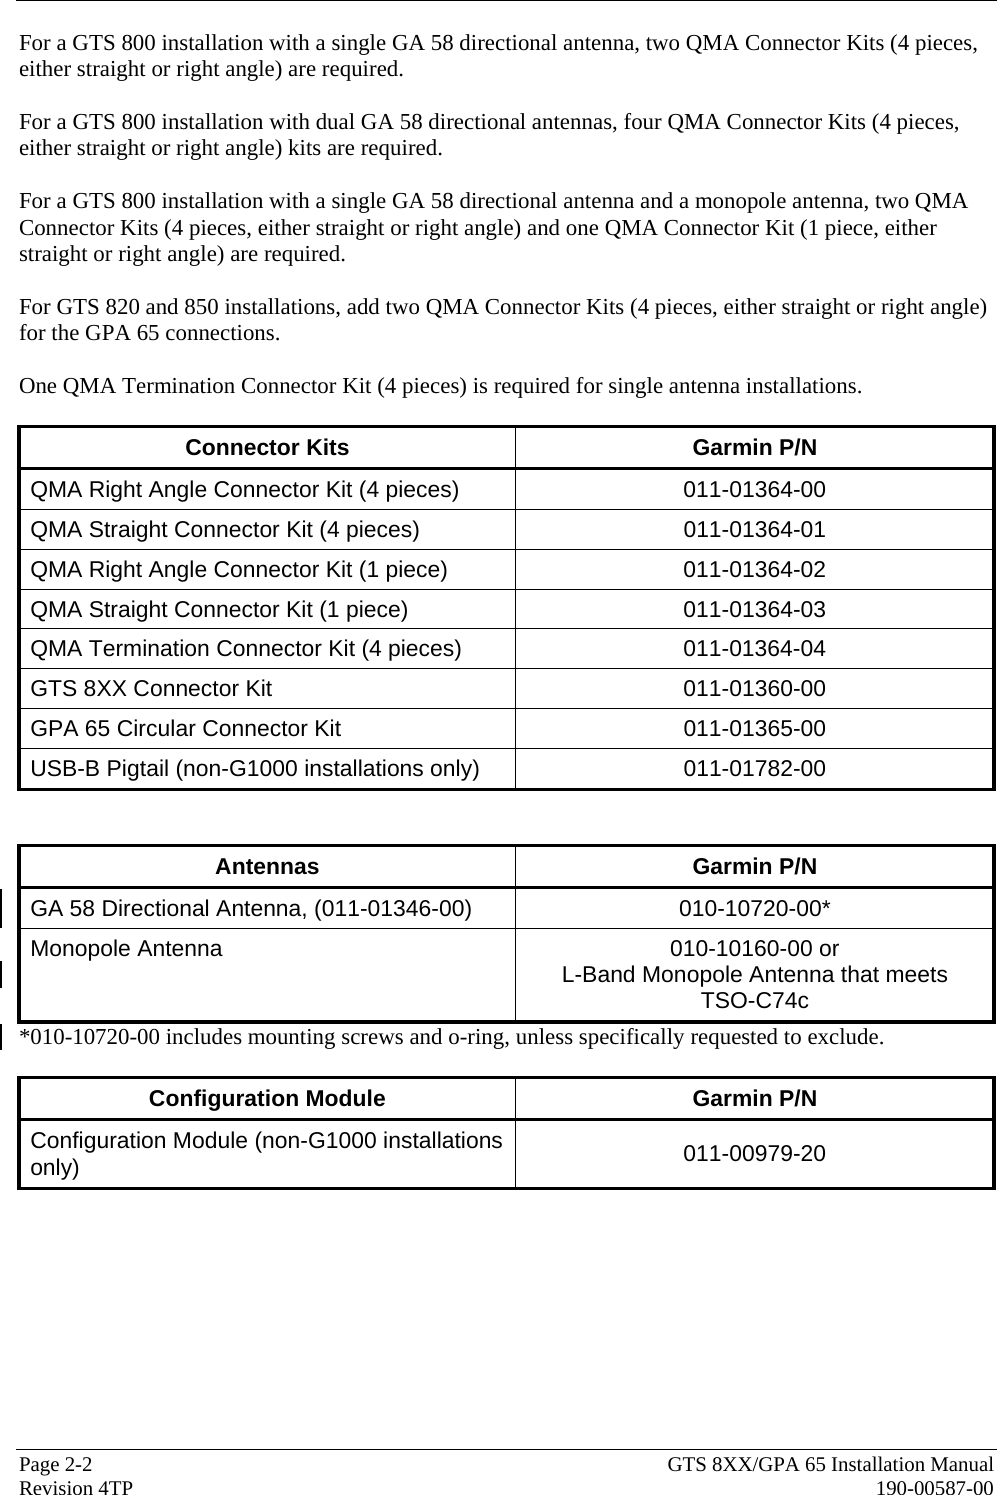  Page 2-2  GTS 8XX/GPA 65 Installation Manual Revision 4TP  190-00587-00 For a GTS 800 installation with a single GA 58 directional antenna, two QMA Connector Kits (4 pieces, either straight or right angle) are required.  For a GTS 800 installation with dual GA 58 directional antennas, four QMA Connector Kits (4 pieces, either straight or right angle) kits are required.  For a GTS 800 installation with a single GA 58 directional antenna and a monopole antenna, two QMA Connector Kits (4 pieces, either straight or right angle) and one QMA Connector Kit (1 piece, either straight or right angle) are required.  For GTS 820 and 850 installations, add two QMA Connector Kits (4 pieces, either straight or right angle) for the GPA 65 connections.  One QMA Termination Connector Kit (4 pieces) is required for single antenna installations.  Connector Kits  Garmin P/N QMA Right Angle Connector Kit (4 pieces)  011-01364-00 QMA Straight Connector Kit (4 pieces)  011-01364-01 QMA Right Angle Connector Kit (1 piece)  011-01364-02 QMA Straight Connector Kit (1 piece)  011-01364-03 QMA Termination Connector Kit (4 pieces)  011-01364-04 GTS 8XX Connector Kit  011-01360-00 GPA 65 Circular Connector Kit  011-01365-00 USB-B Pigtail (non-G1000 installations only)  011-01782-00   Antennas Garmin P/N GA 58 Directional Antenna, (011-01346-00)  010-10720-00* Monopole Antenna  010-10160-00 or L-Band Monopole Antenna that meets  TSO-C74c *010-10720-00 includes mounting screws and o-ring, unless specifically requested to exclude.  Configuration Module  Garmin P/N Configuration Module (non-G1000 installations only)  011-00979-20    